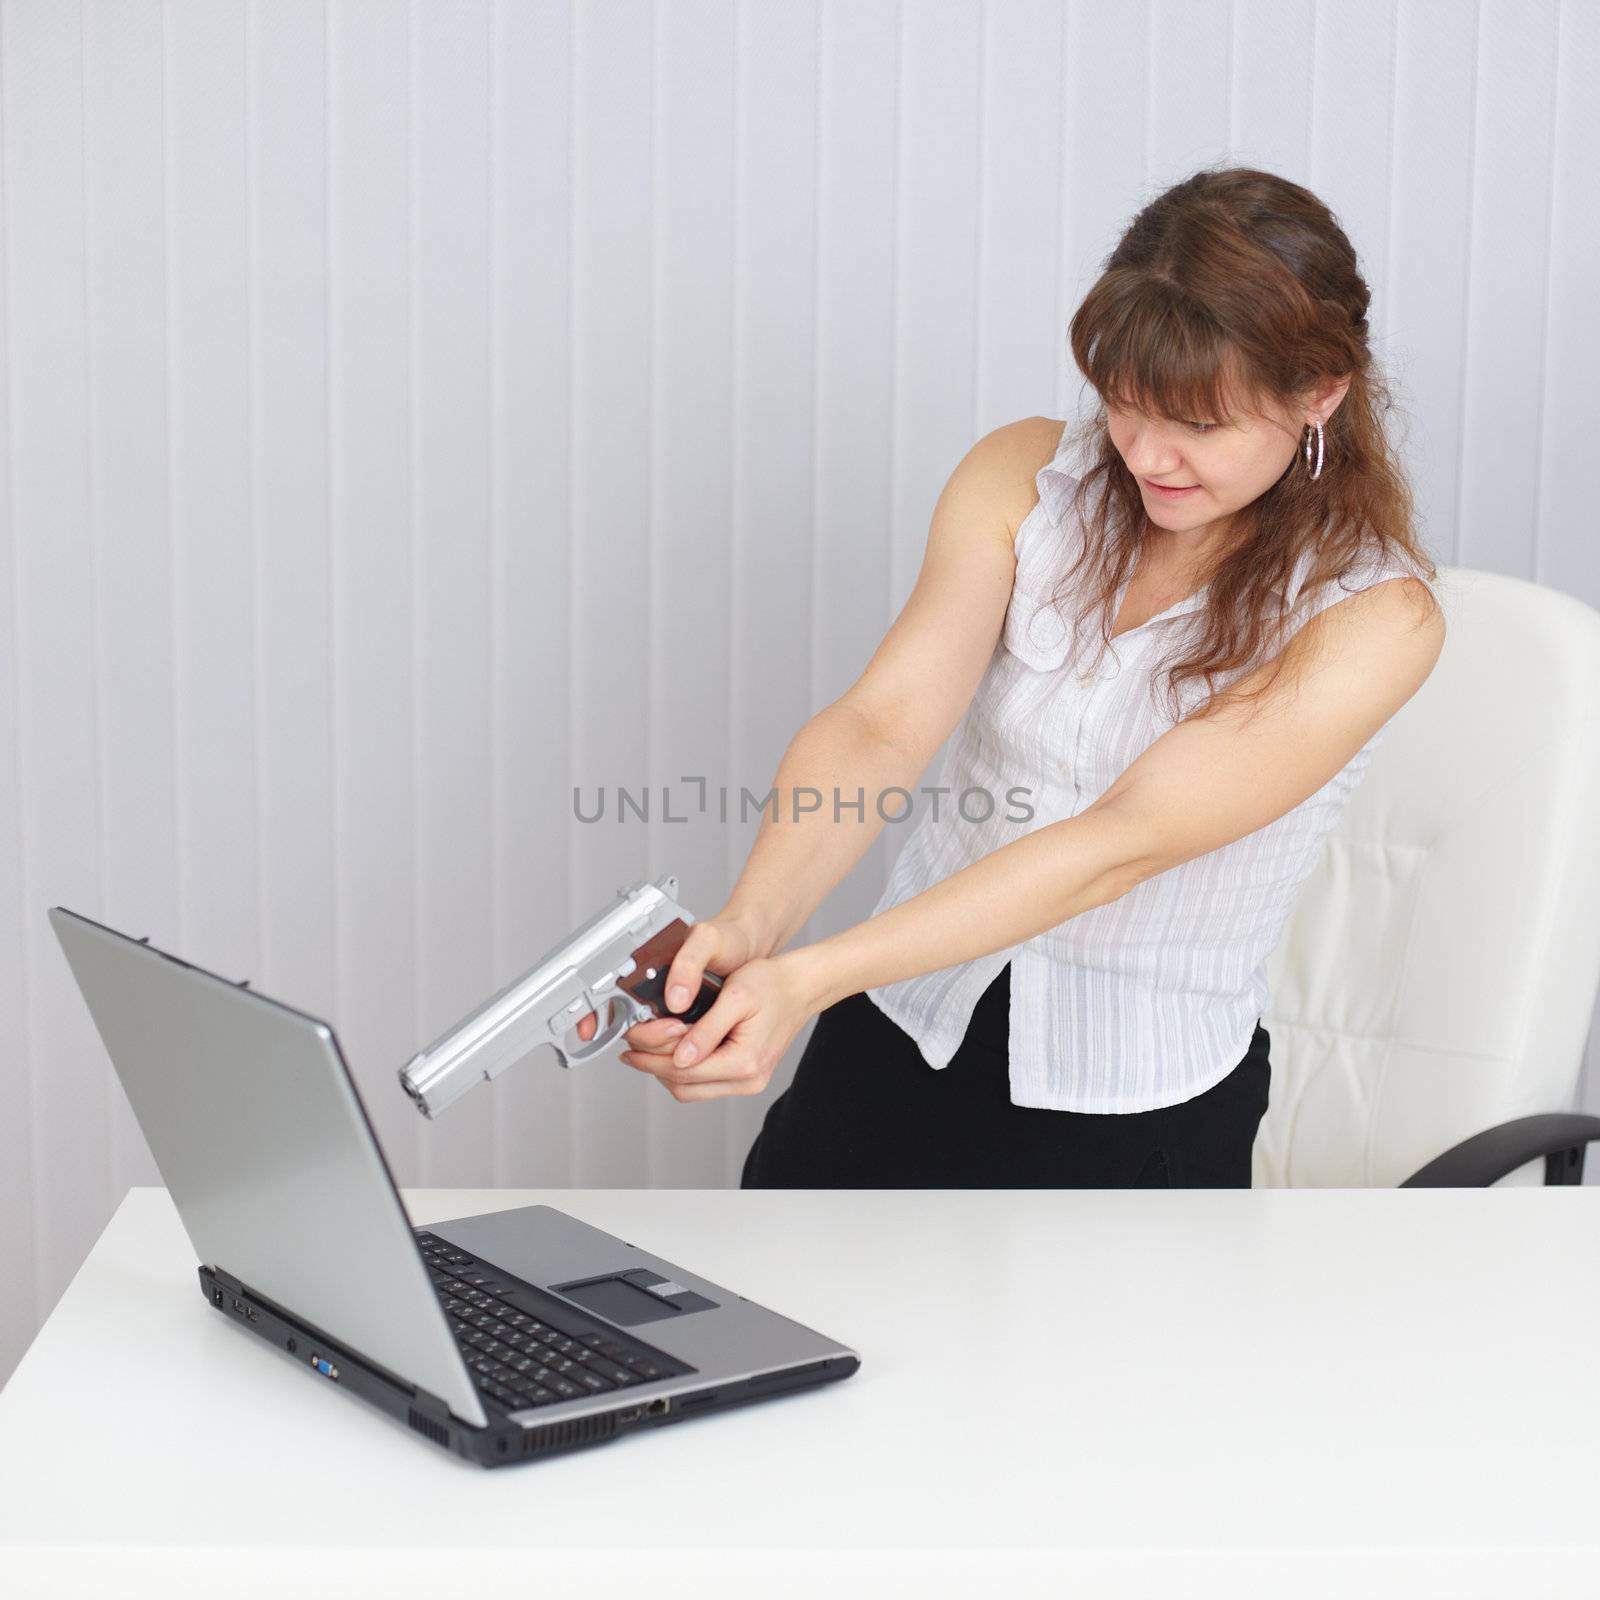 The young woman shoots at the laptop from a pistol